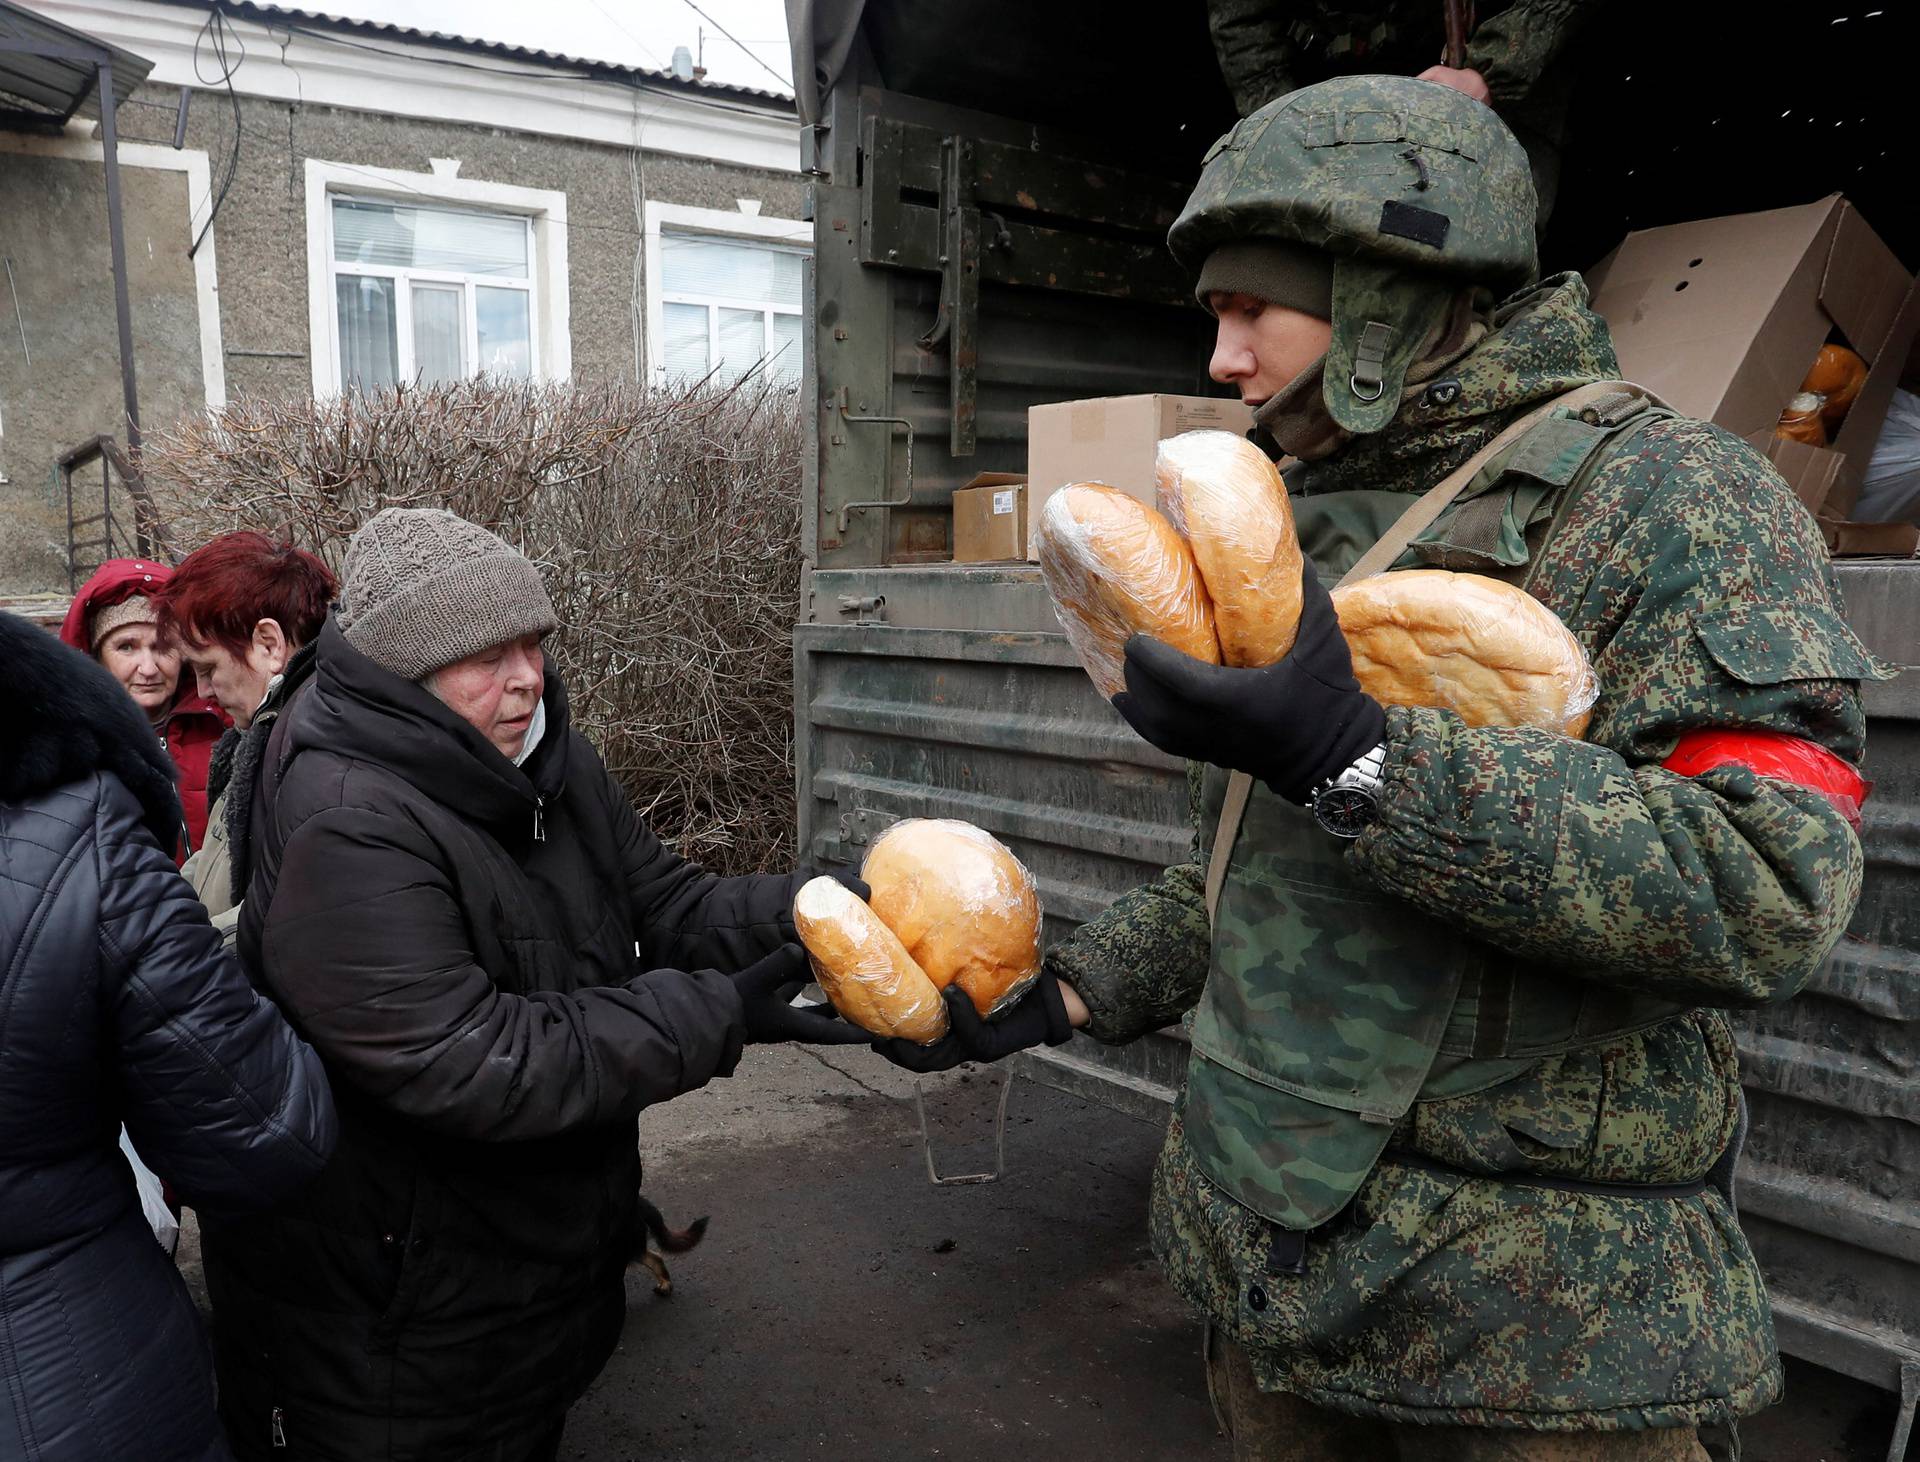 People receive humanitarian aid in the Donetsk region